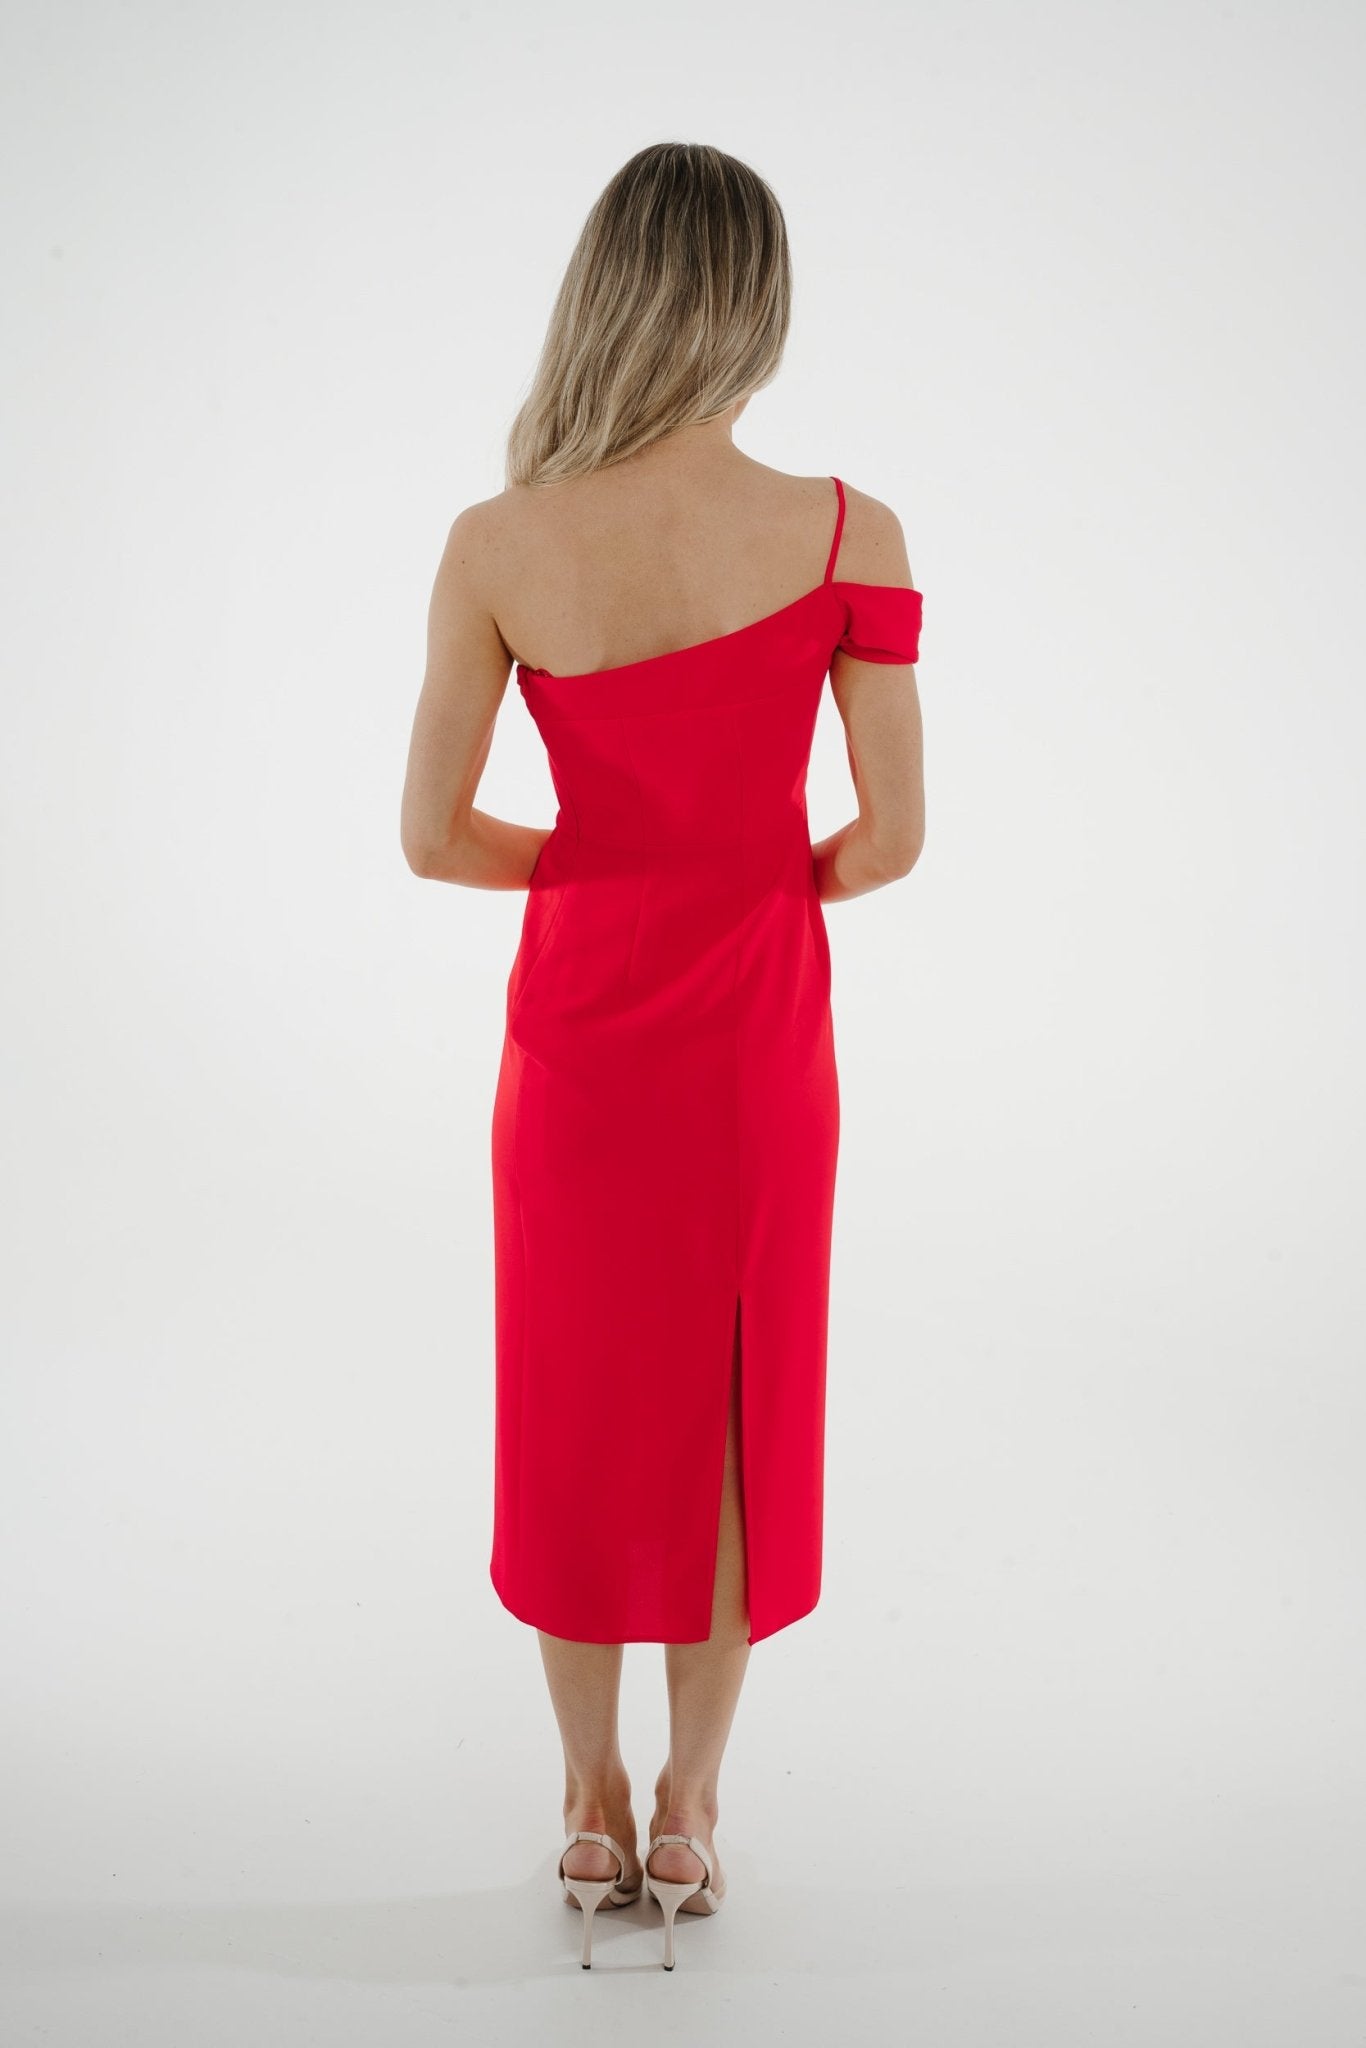 Kayla One Shoulder Dress In Coral Red - The Walk in Wardrobe